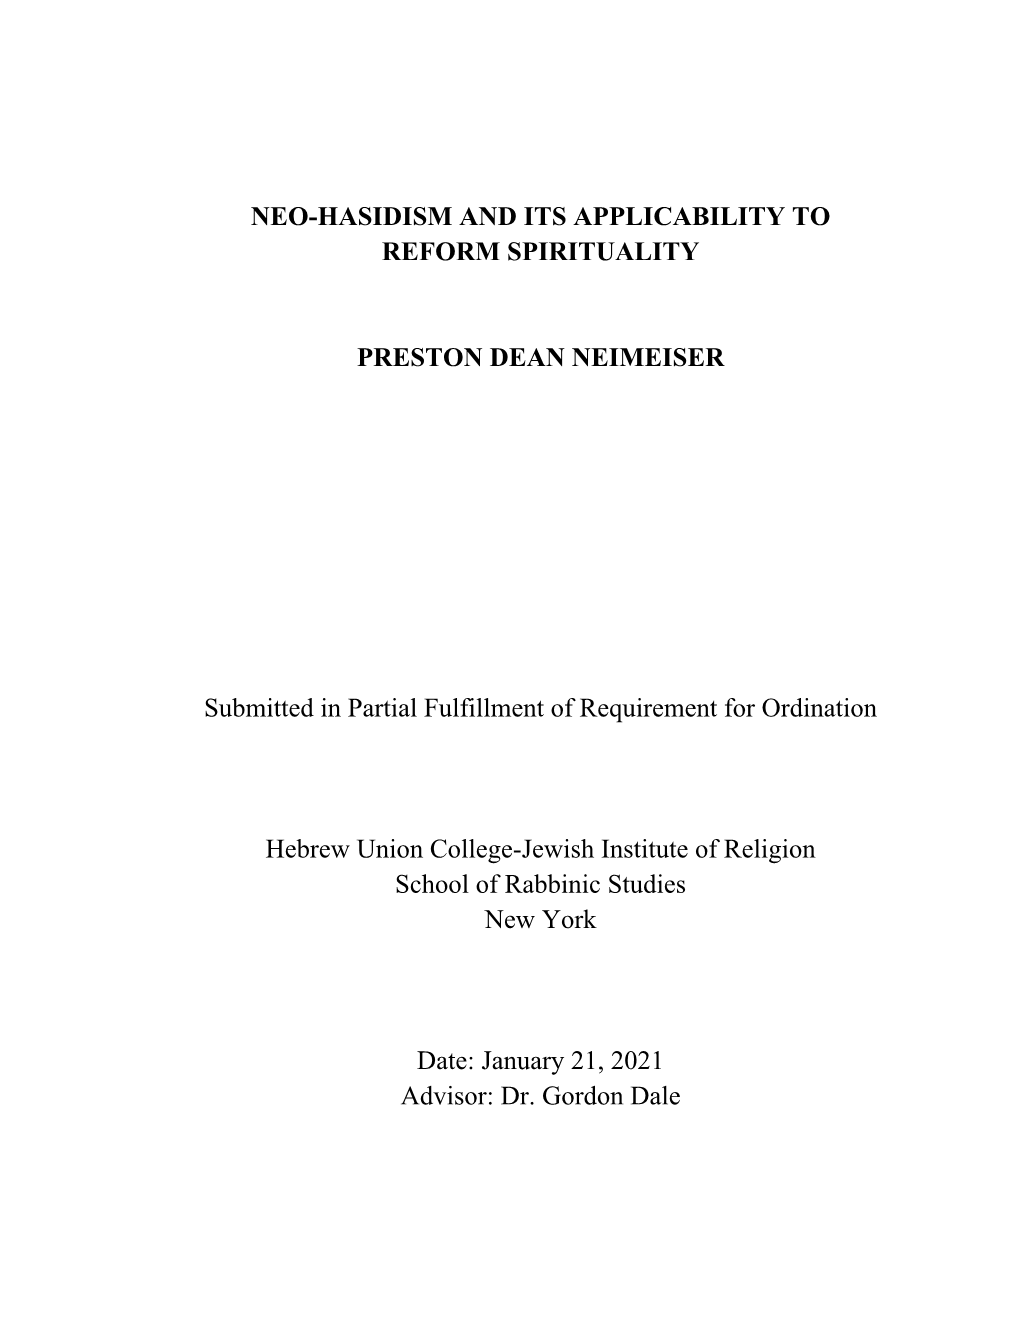 Neo-Hasidism and Its Applicability to Reform Spirituality